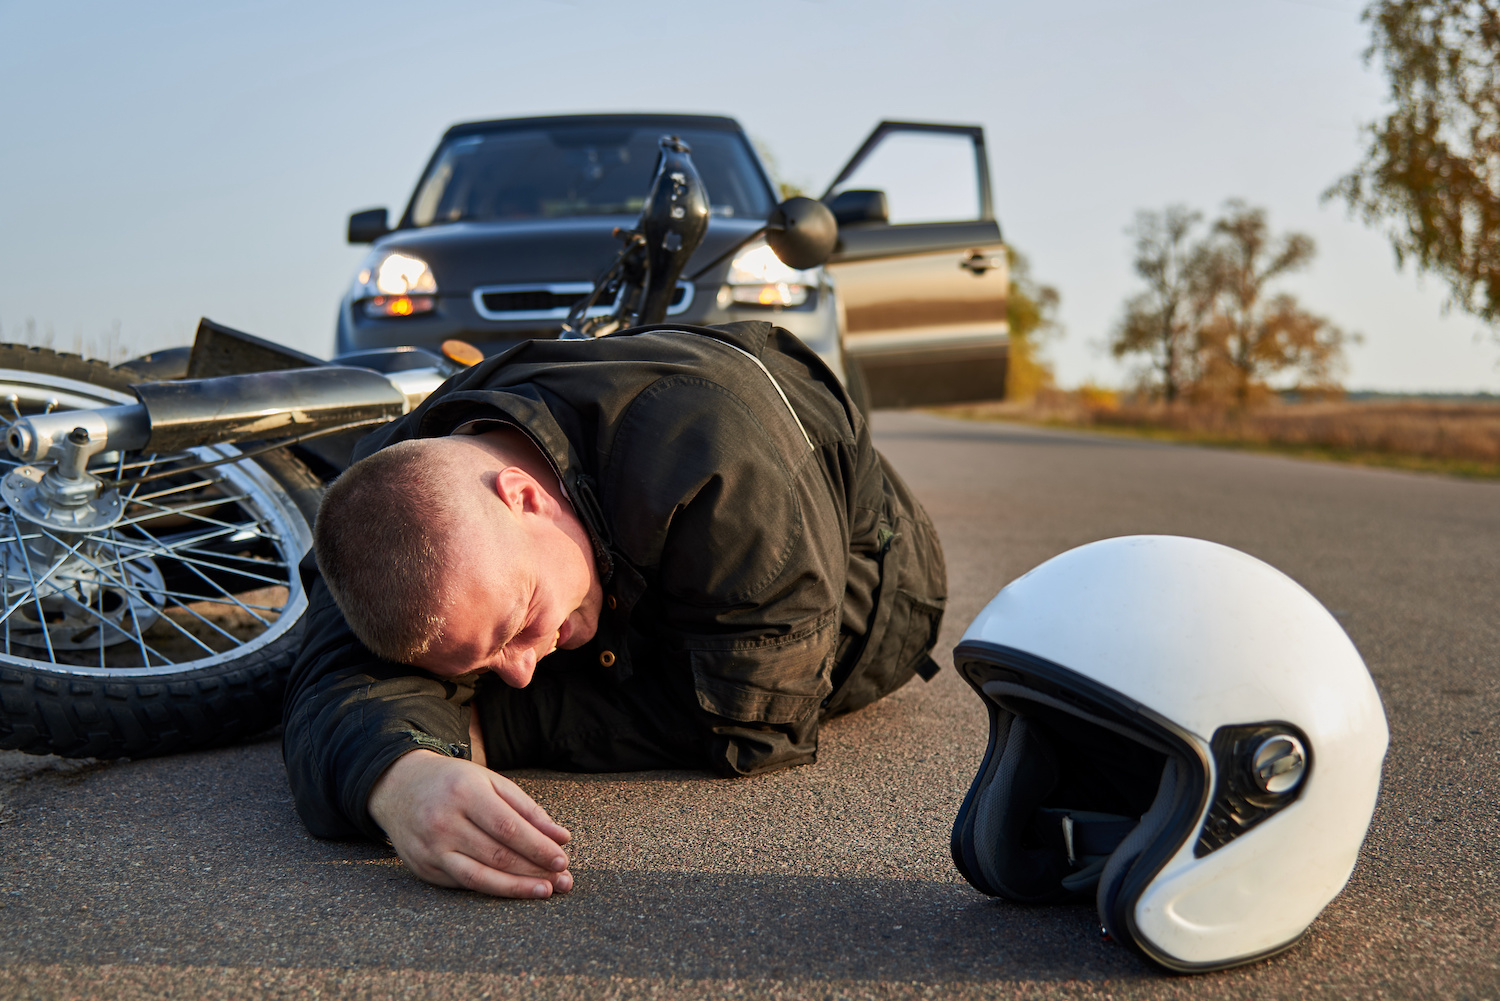 How To File A Police Report After A Motorcycle Accident In Miami